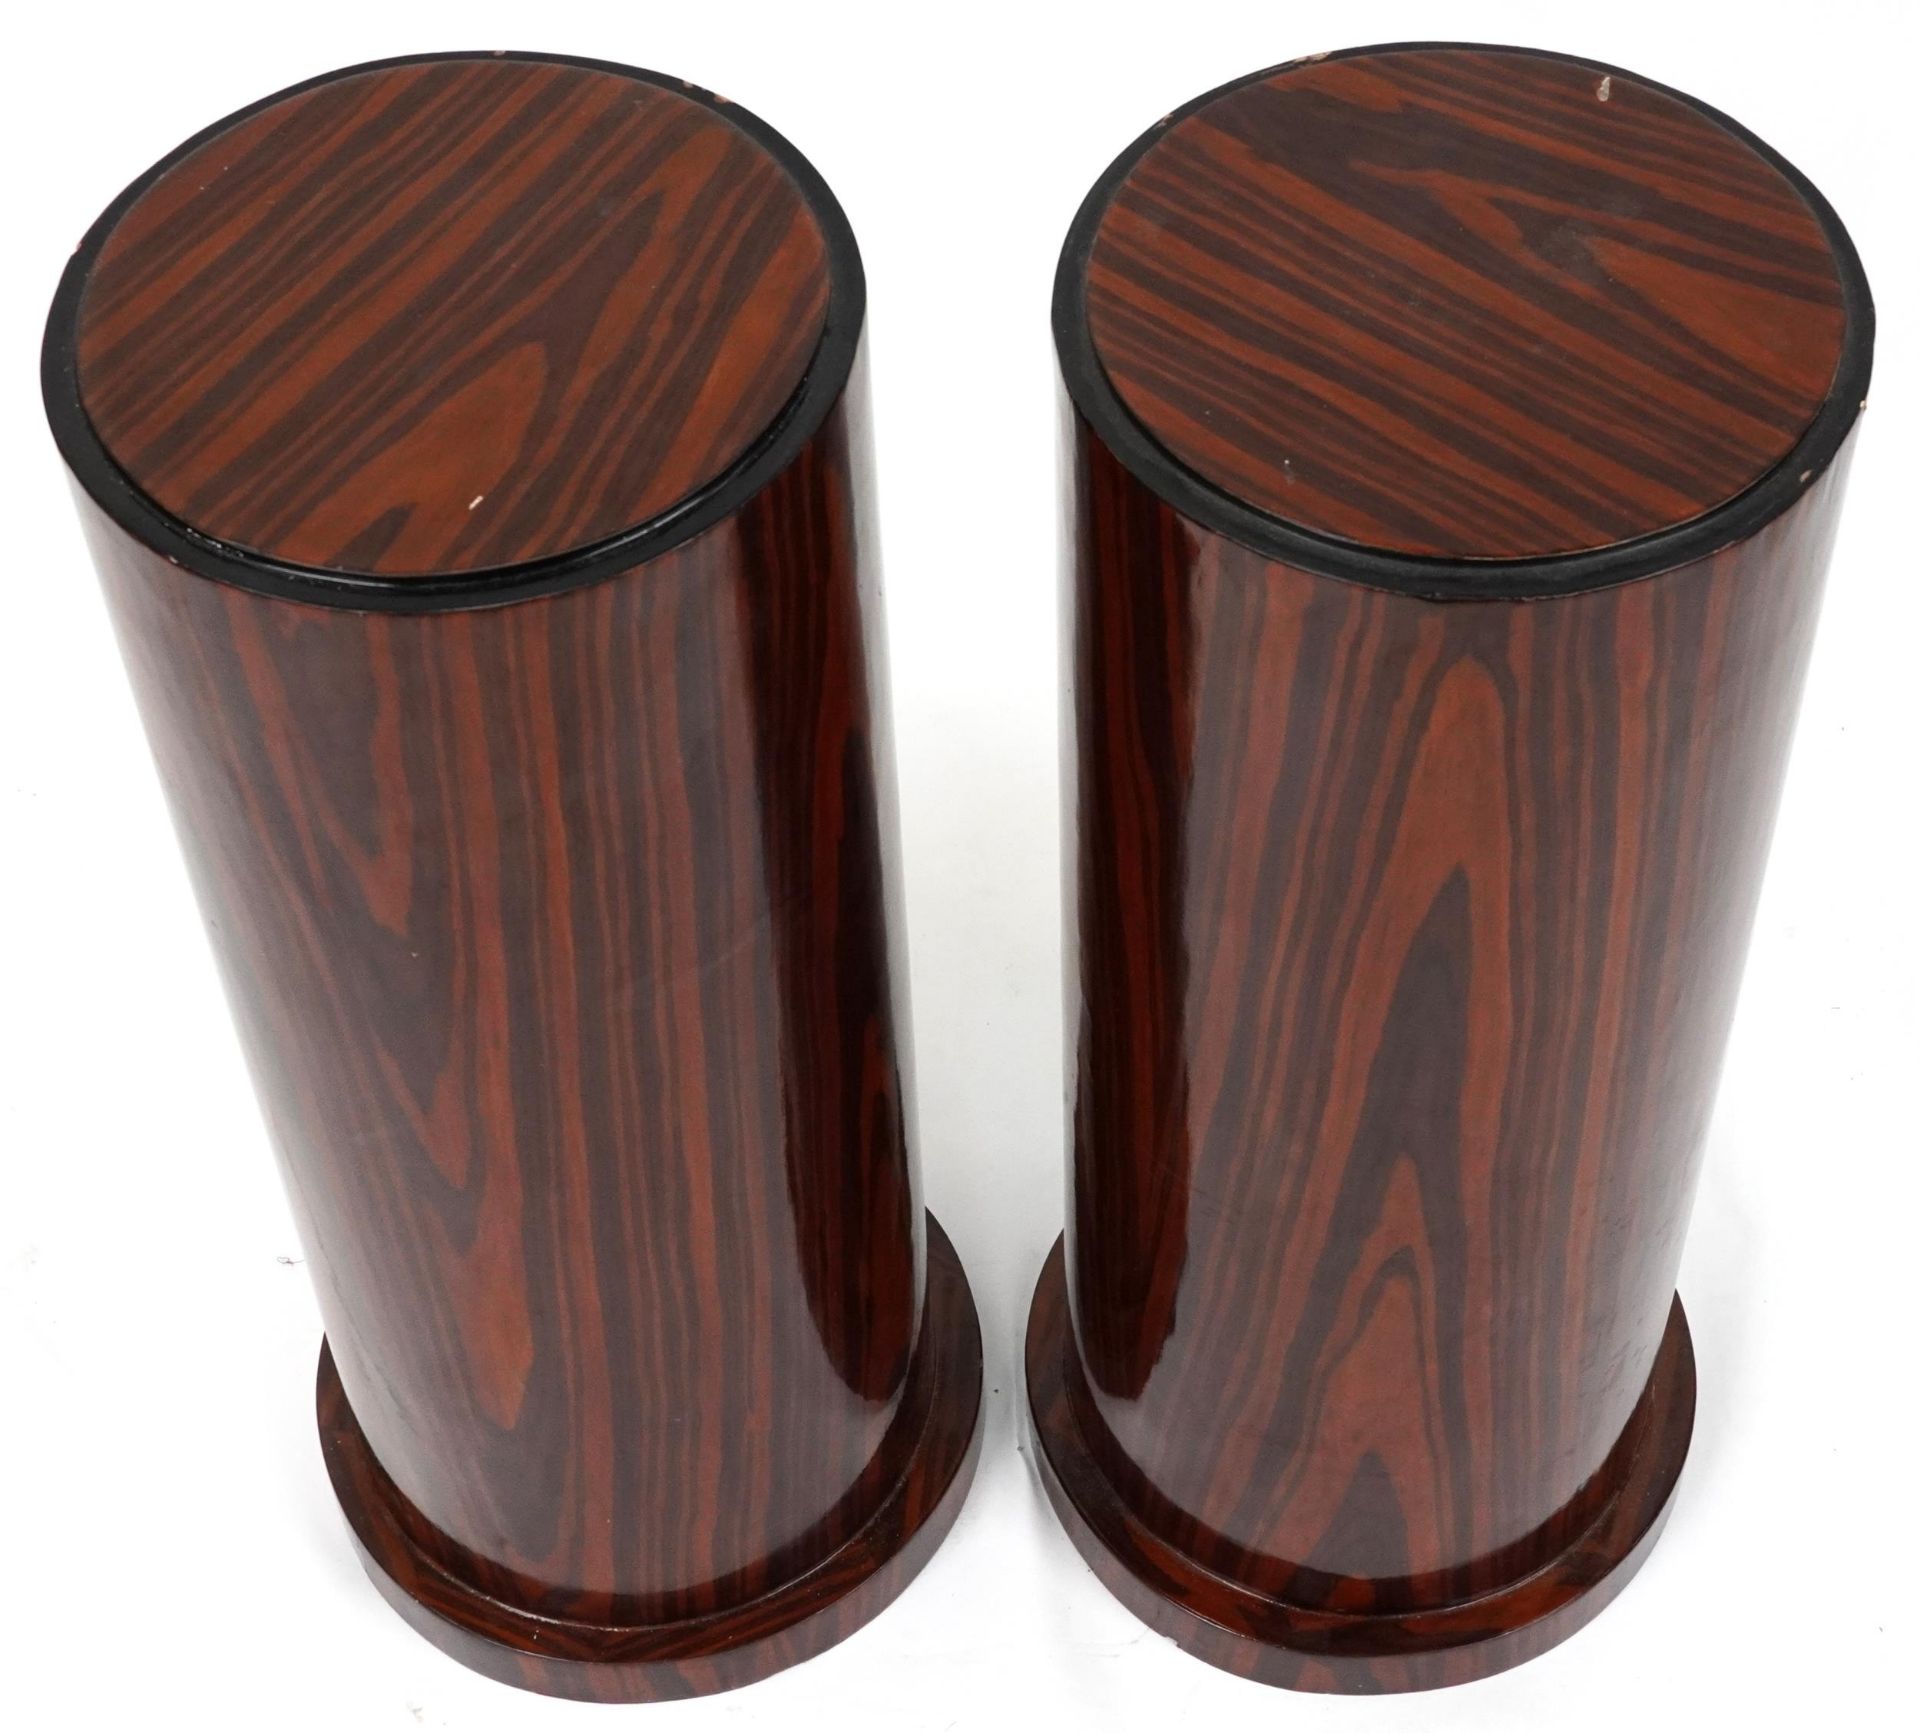 Pair of Art Deco style rosewood effect cylindrical columns, each 80cm high - Image 2 of 3